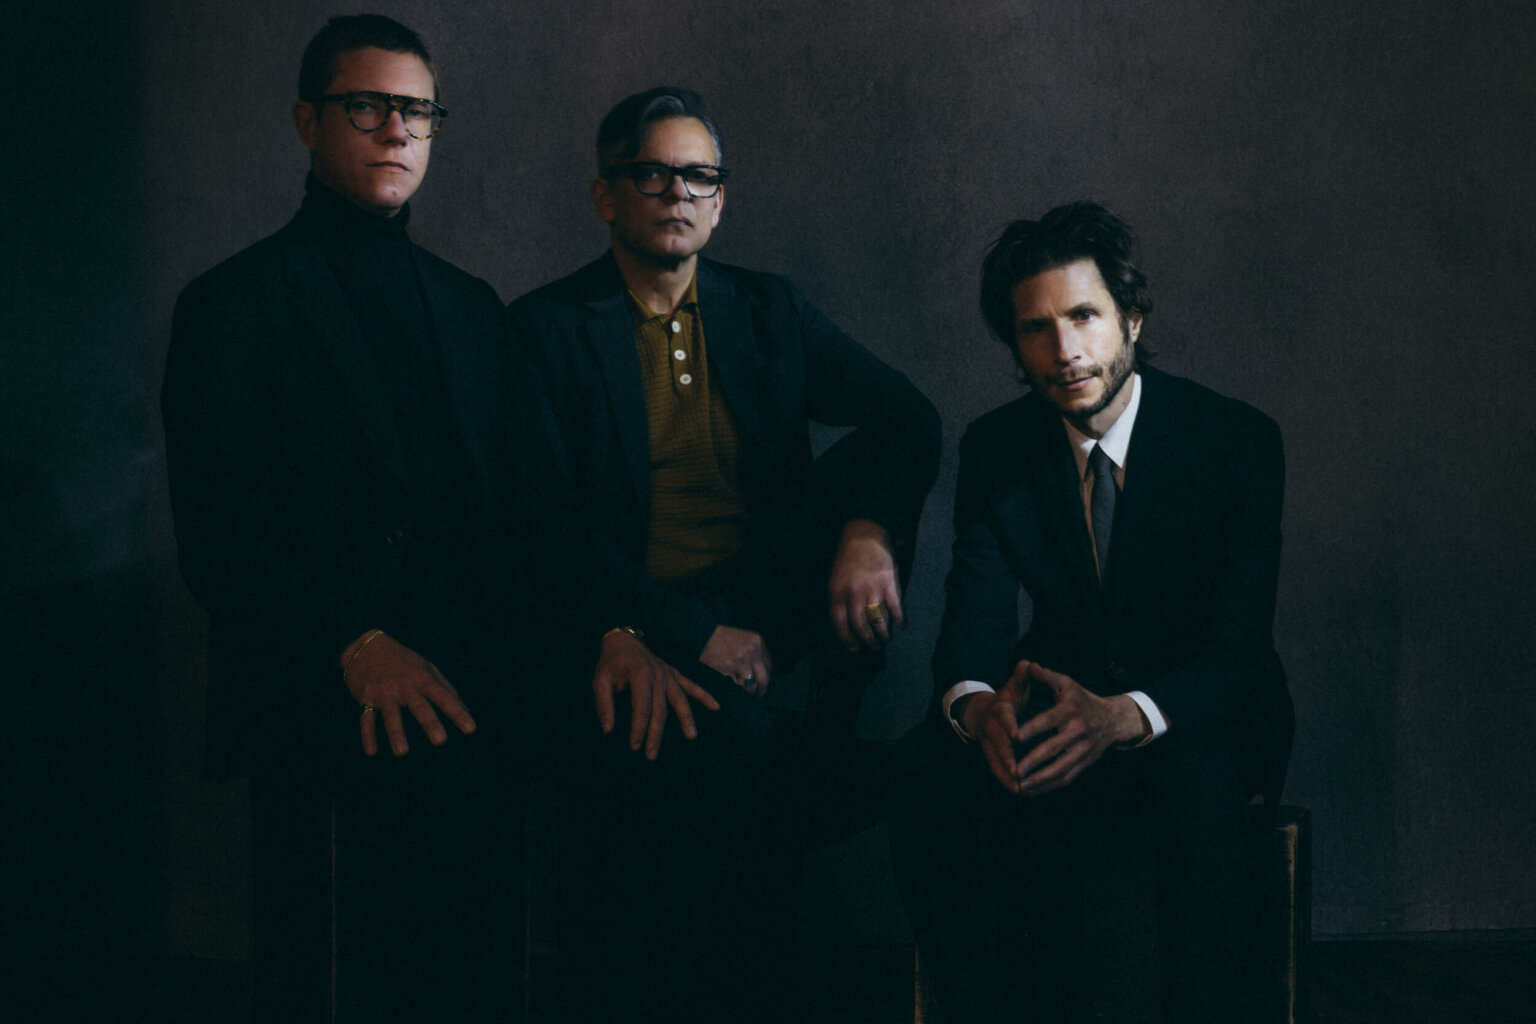 Interpol Debuts Fan Created Video for "Passenger." The track is off their current album The Other Side Of Make-Believe, now out via Matador